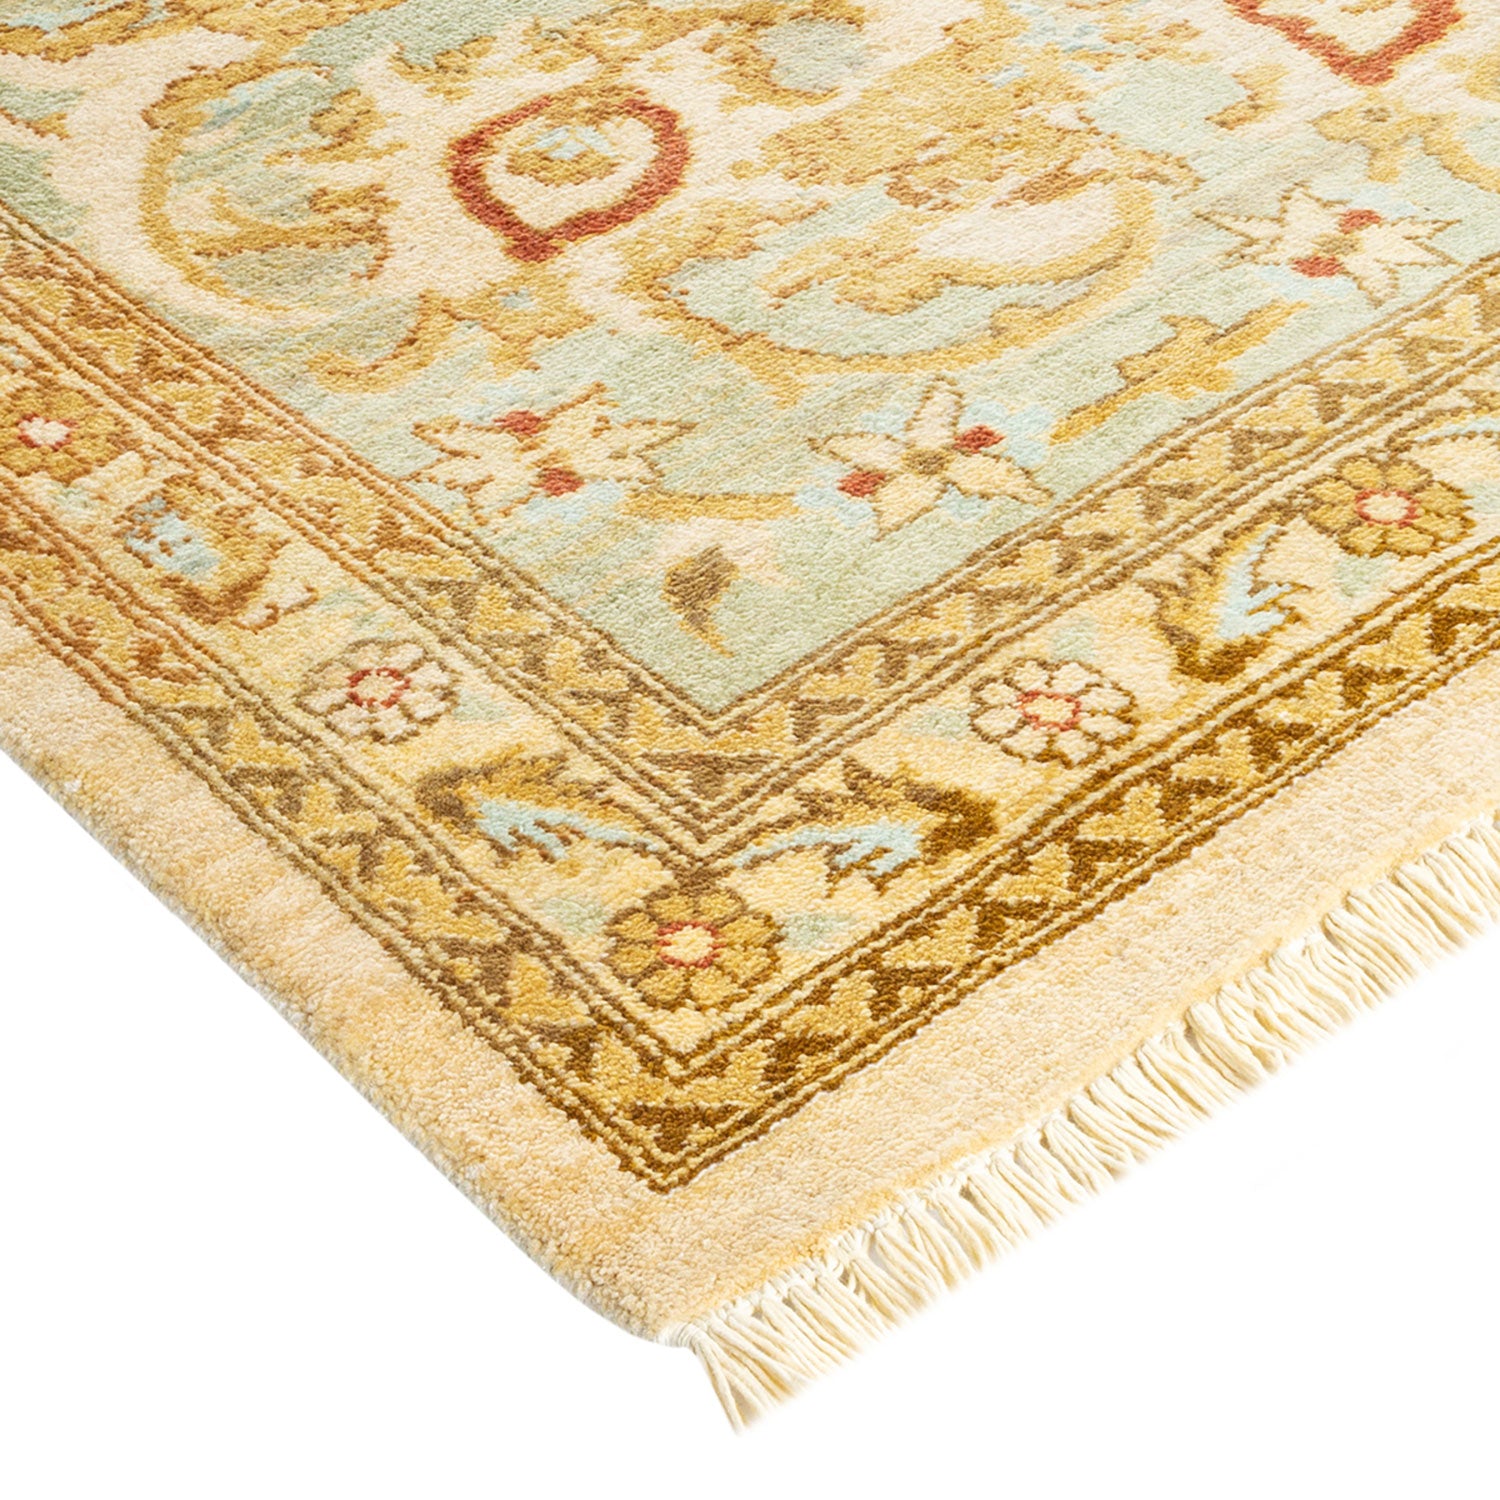 Intricate Persian-inspired rug with vibrant colors and detailed motifs.